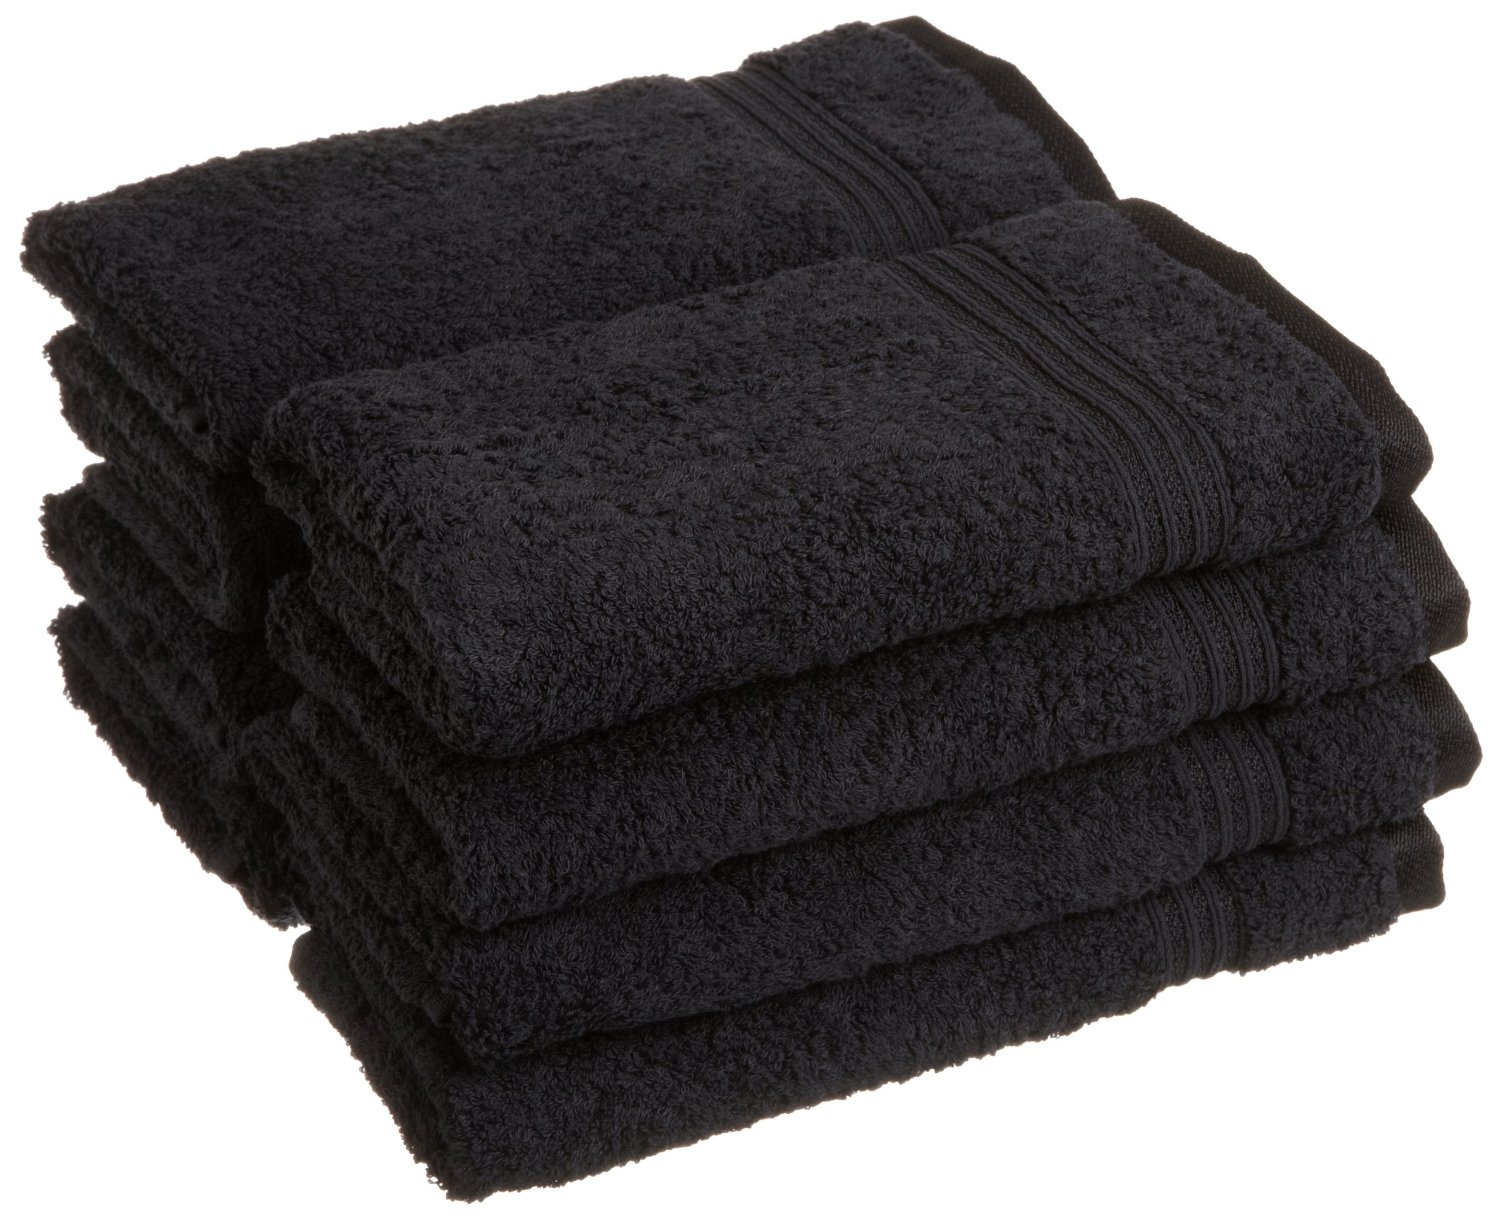 Egyptian Cotton 8PC Hand Towels